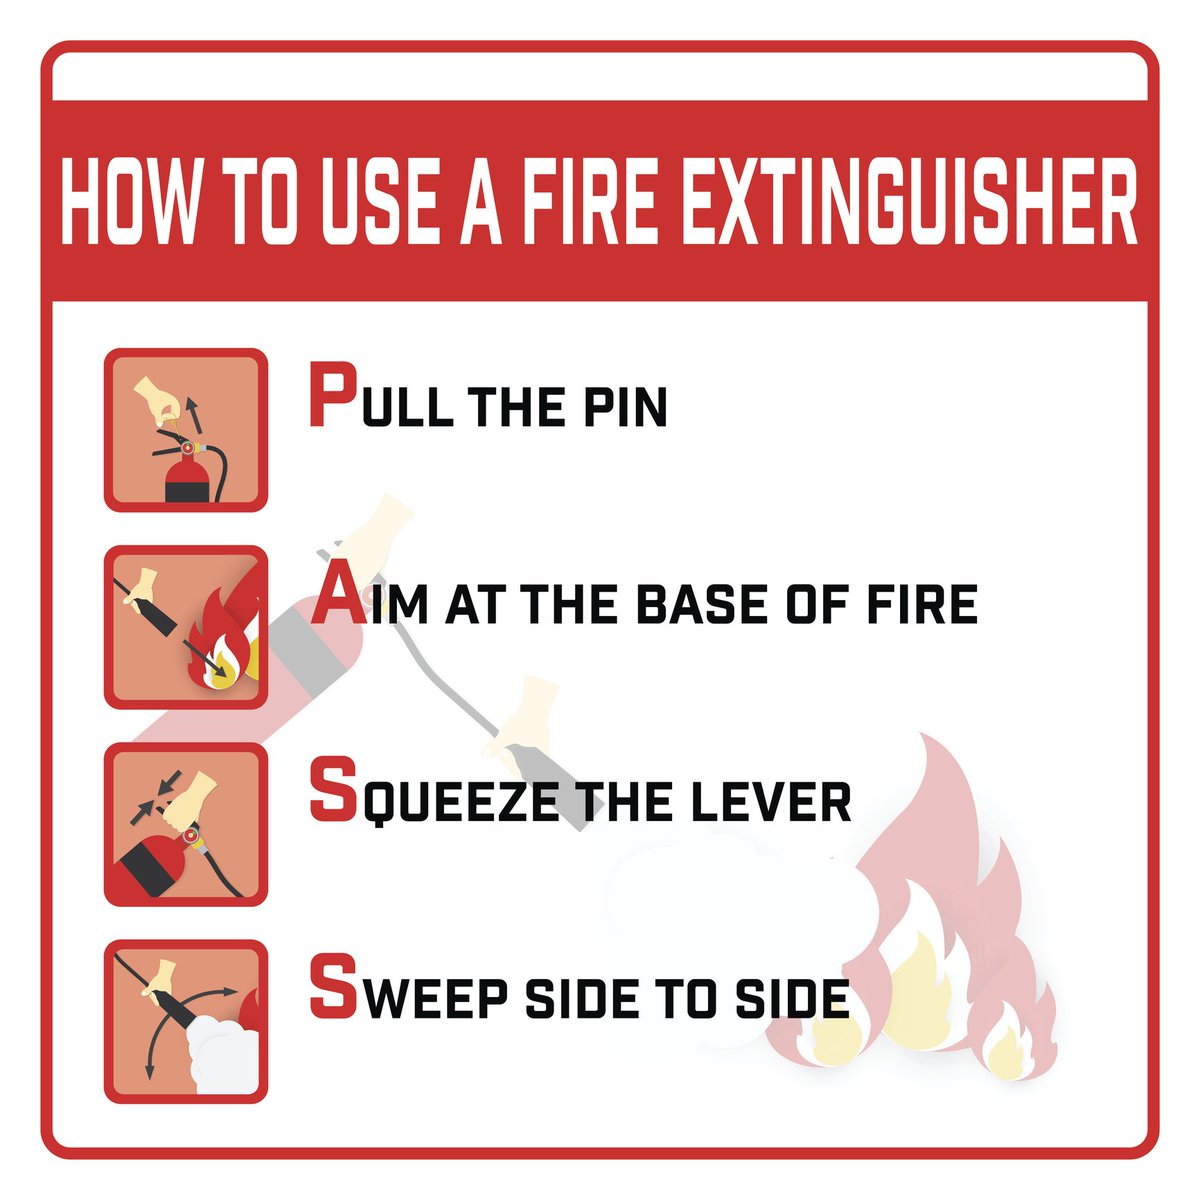 Cdc Emergency Pa Twitter Learn Practical Skills Lessons Like How To Use A Fire Extinguisher To Prepare For The Possibility Of Kitchen Fire On Thanksgiving Remember The Acronym P A S S Learn More